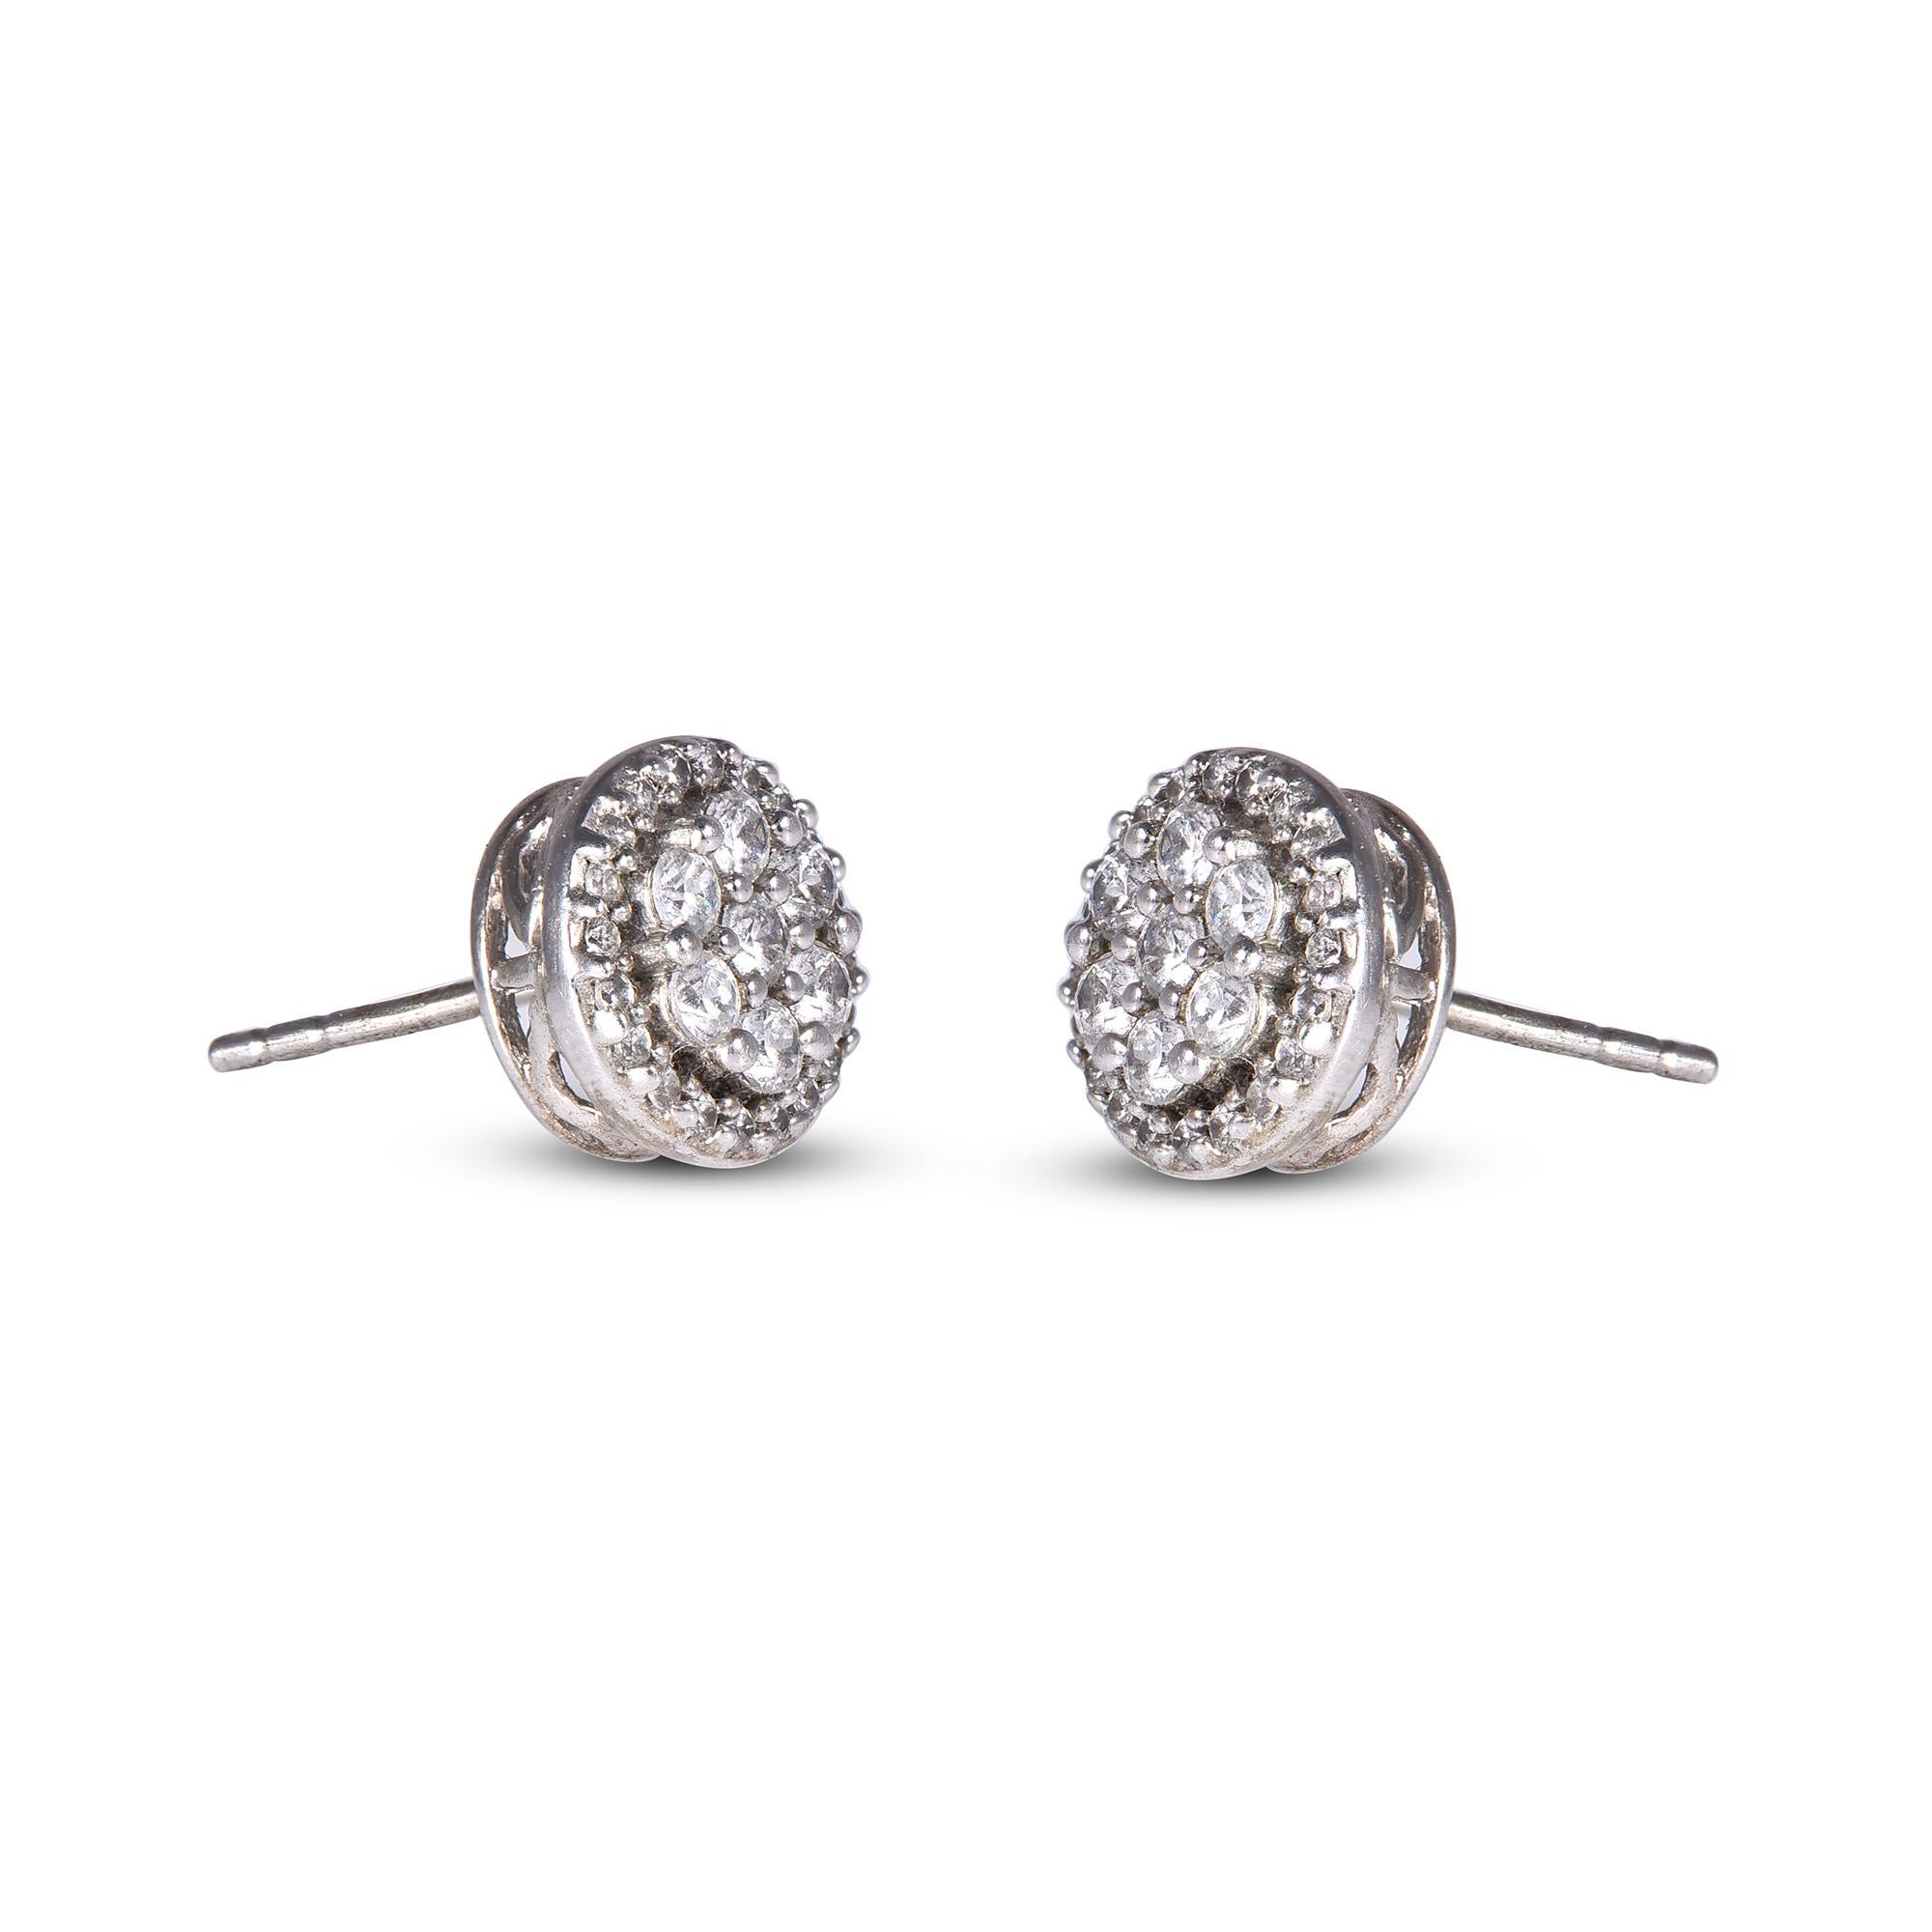 These exquisite diamond cluster stud earrings offer beauty equaled only to her own. These earrings feature 54 brilliant-cut dazzling diamonds.These timeless stud earrings top post settings that secure comfortably with post and backs. The total